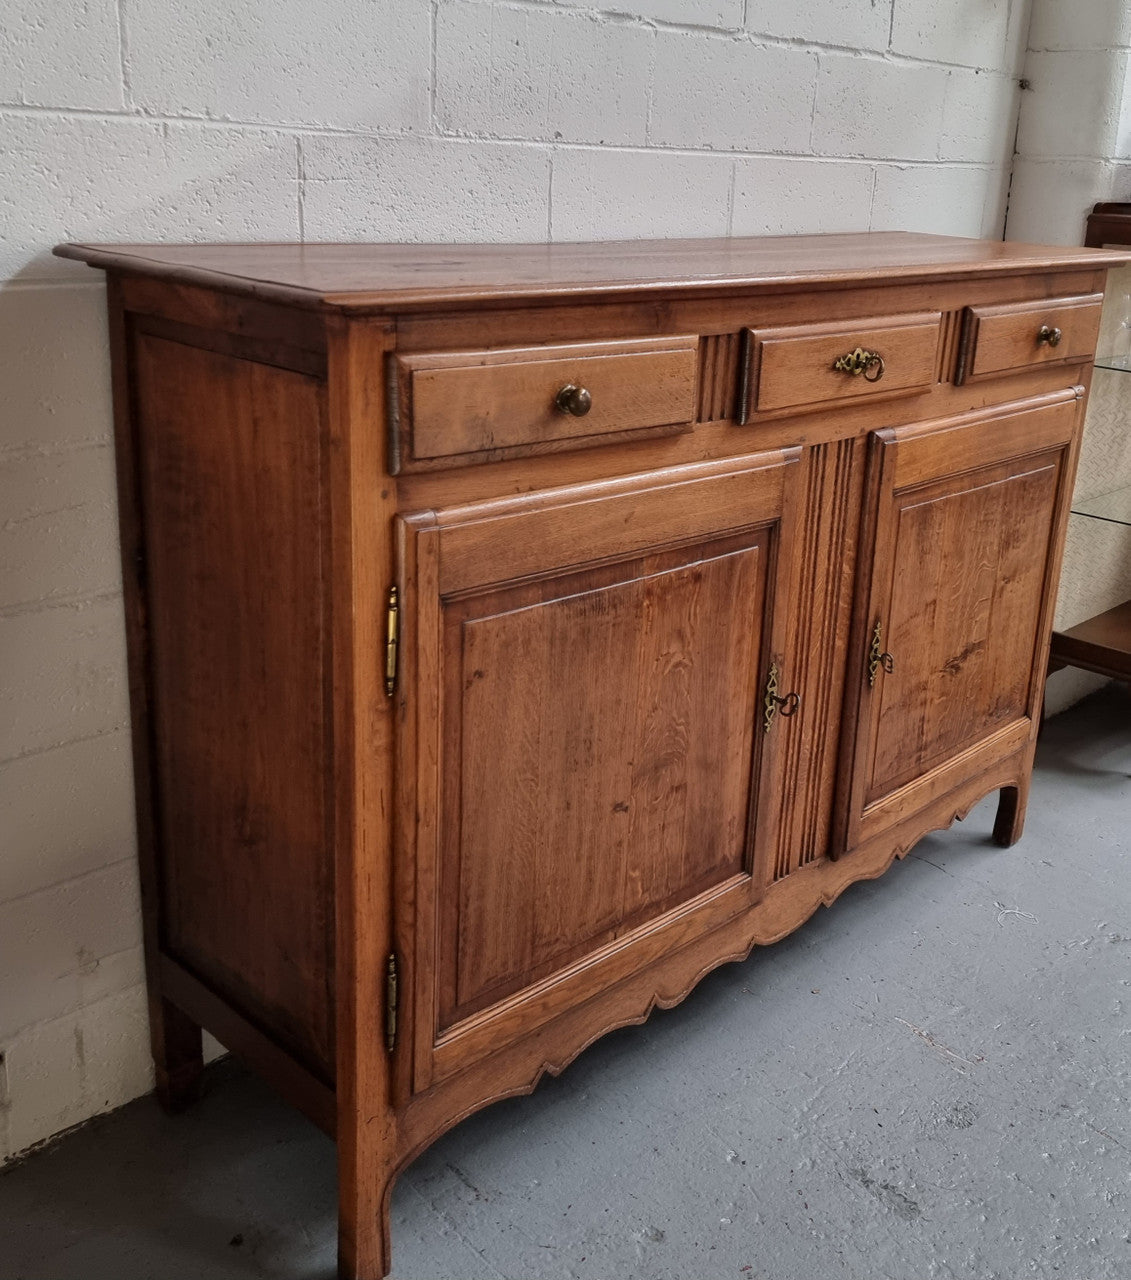 French Oak Early 19th Century sideboard with two doors and three drawers. In good original condition.